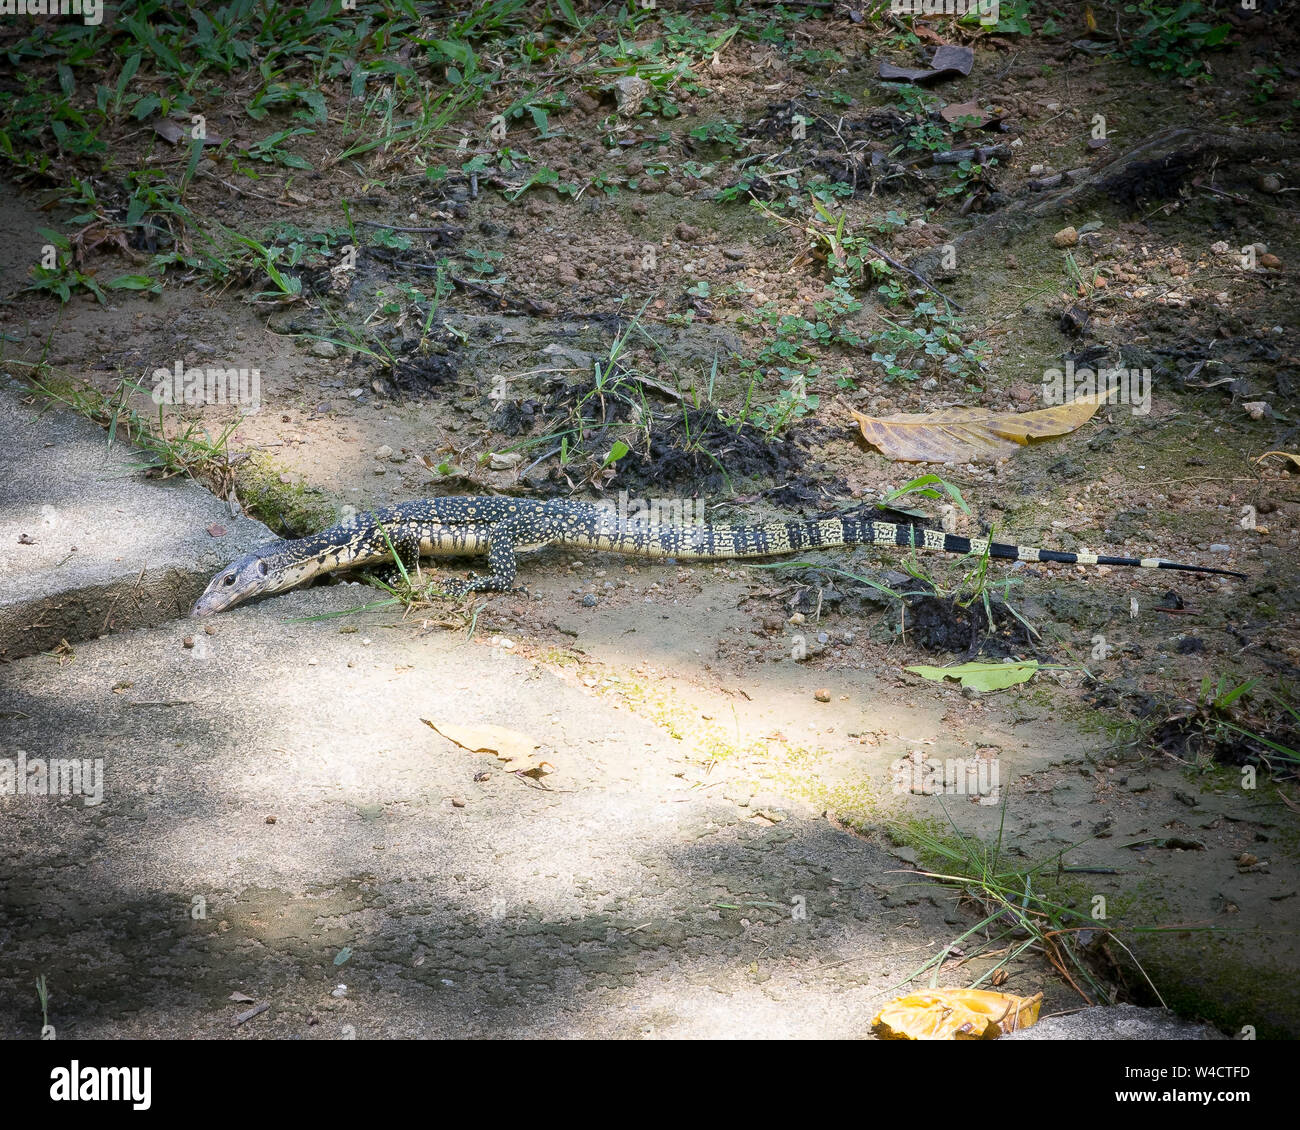 Reptiles lizard on the ground in the park. Stock Photo